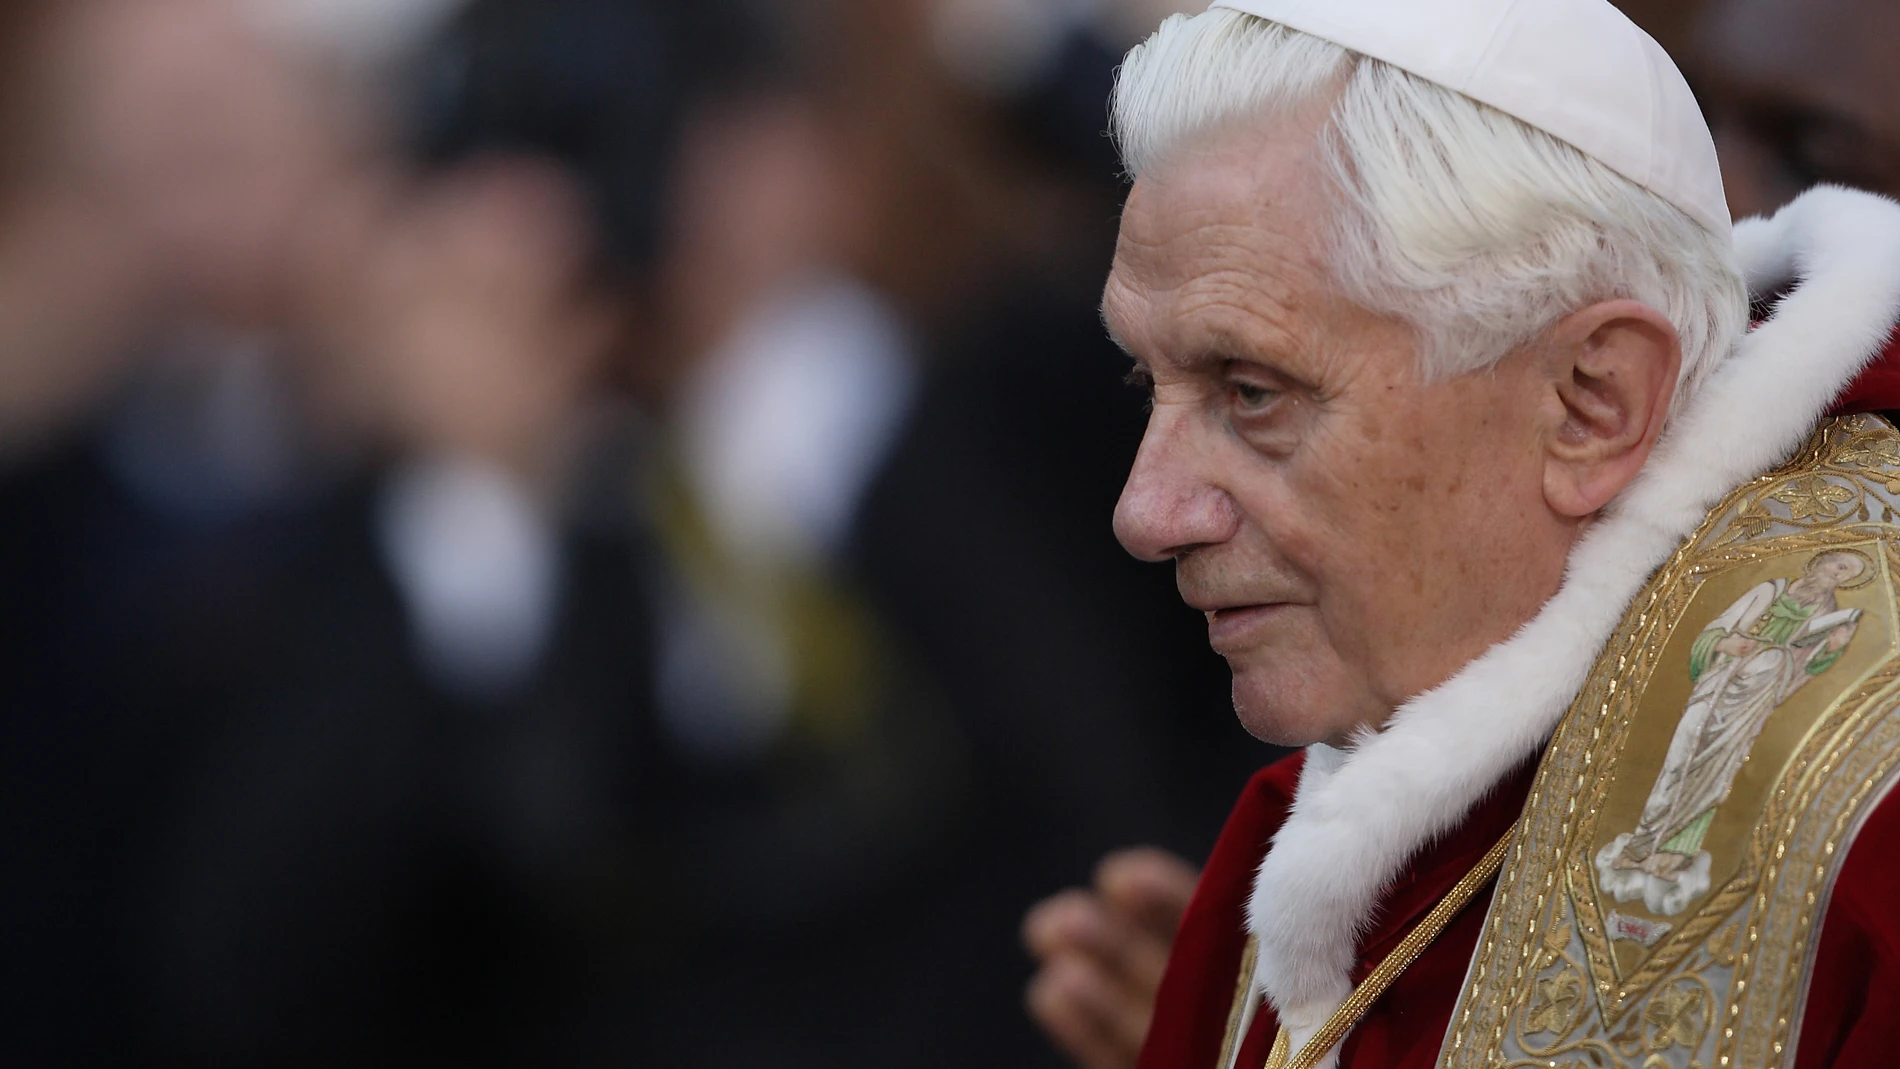 Dec 8, 2010 - Rome, Italy - Pope BENEDICT XVI preside the solemnity of the Immaculate Conception celebration of the Blessed Virgin Mary at Spain Square in Rome.31 DICIEMBRE 2022i15 / Zuma Press / ContactoPhoto28/12/2022